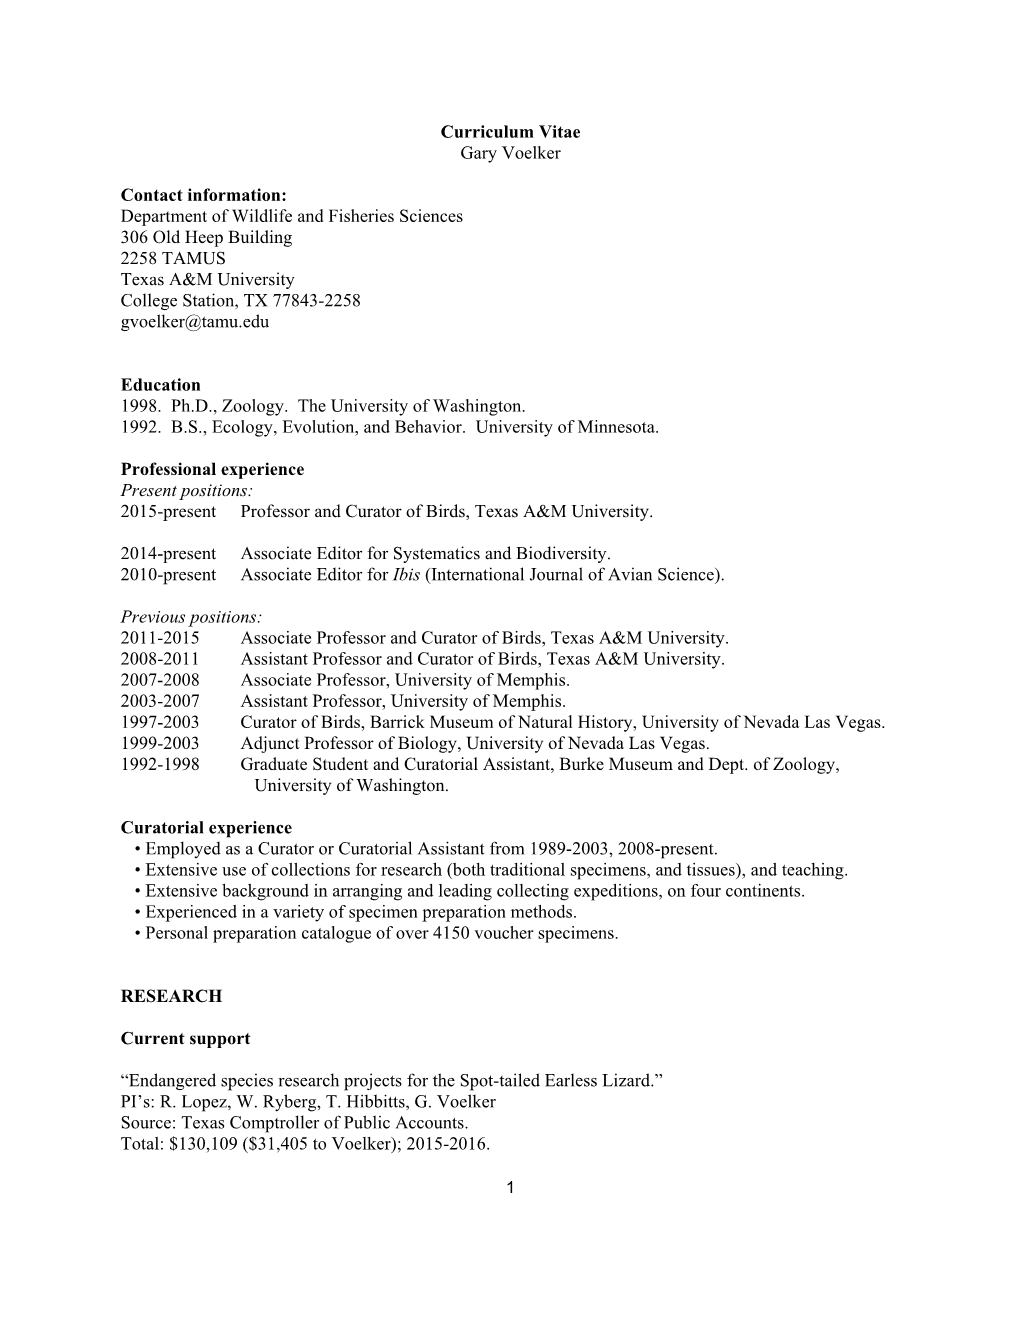 Curriculum Vitae Gary Voelker Contact Information: Department Of